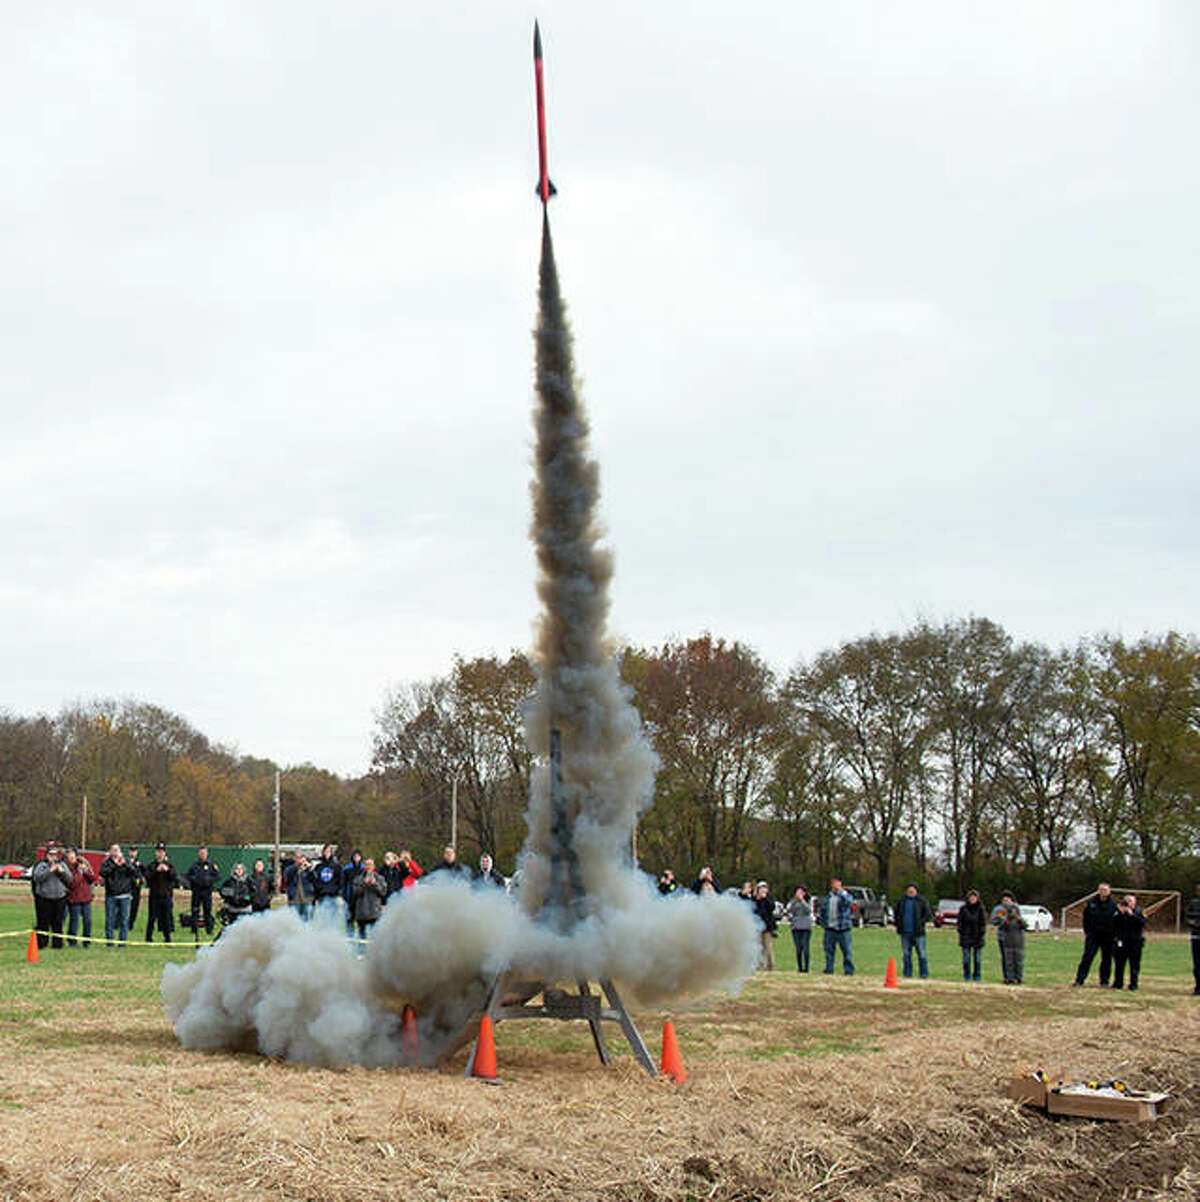 A 63-inch high-powered rocket launches on Nov. 9, 2018 on SIUE’s campus near Korte Stadium. The successful launch was the first for Cougar Rockets, a new student organization dedicated to designing, building and flying rockets.